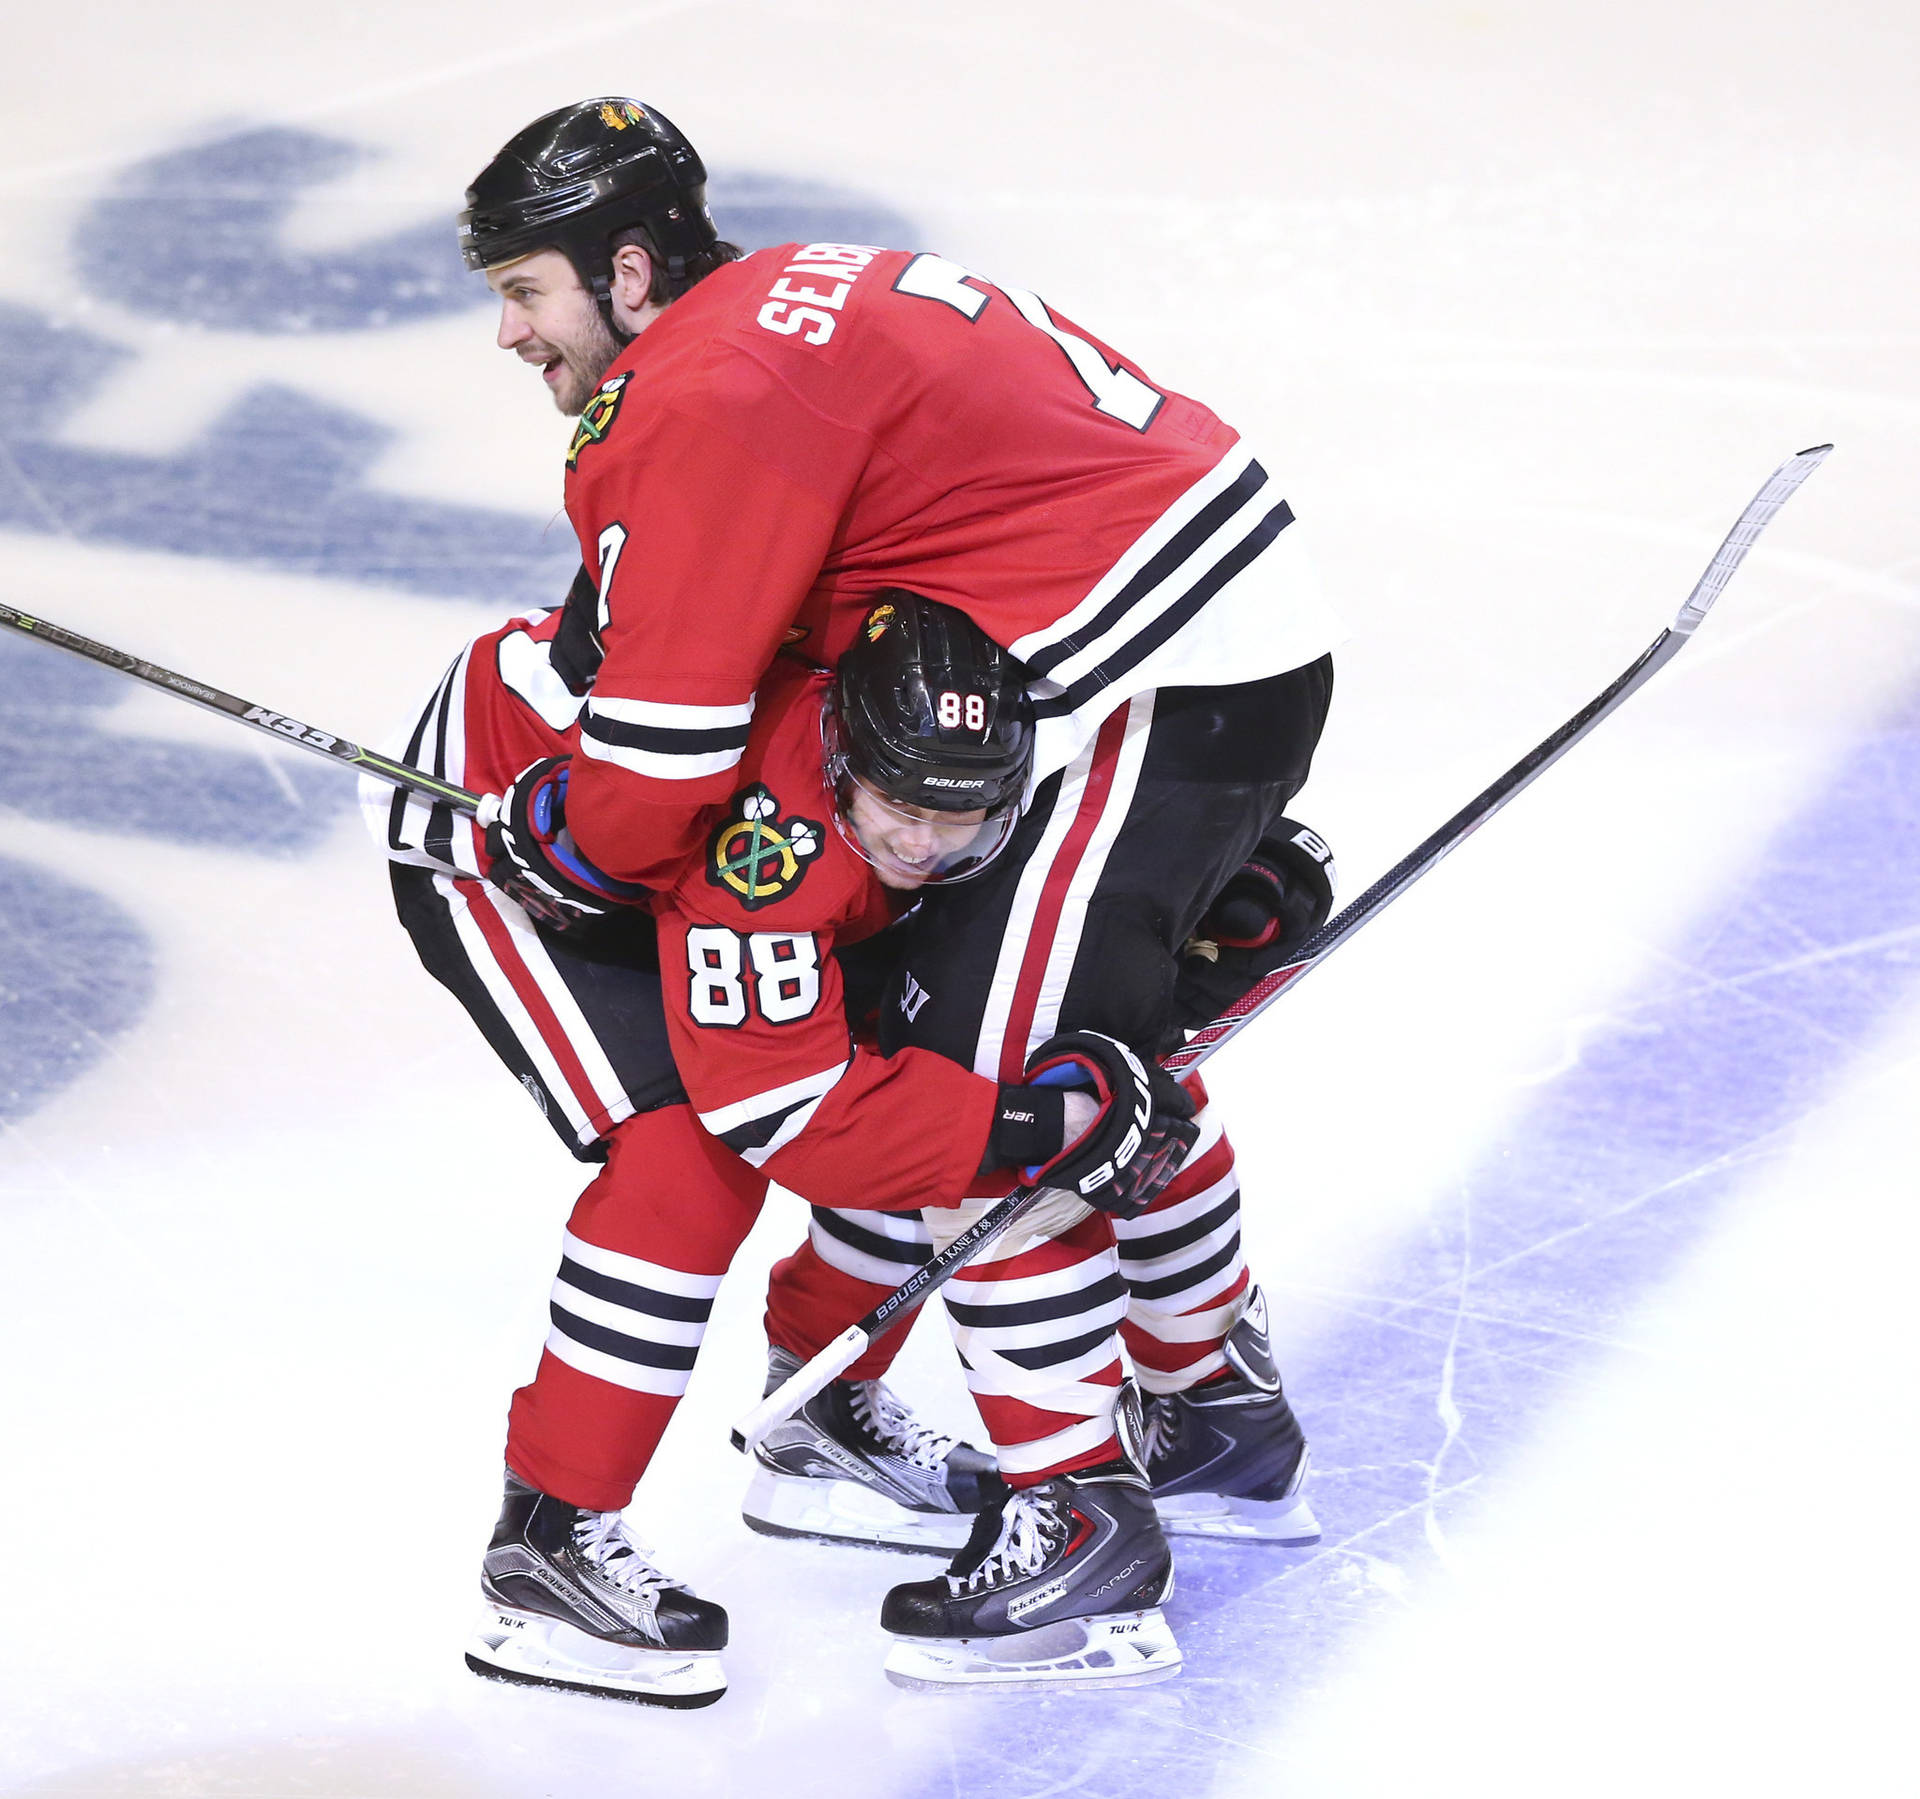 Brent Seabrook and Patrick Kane celebrating on the ice Wallpaper